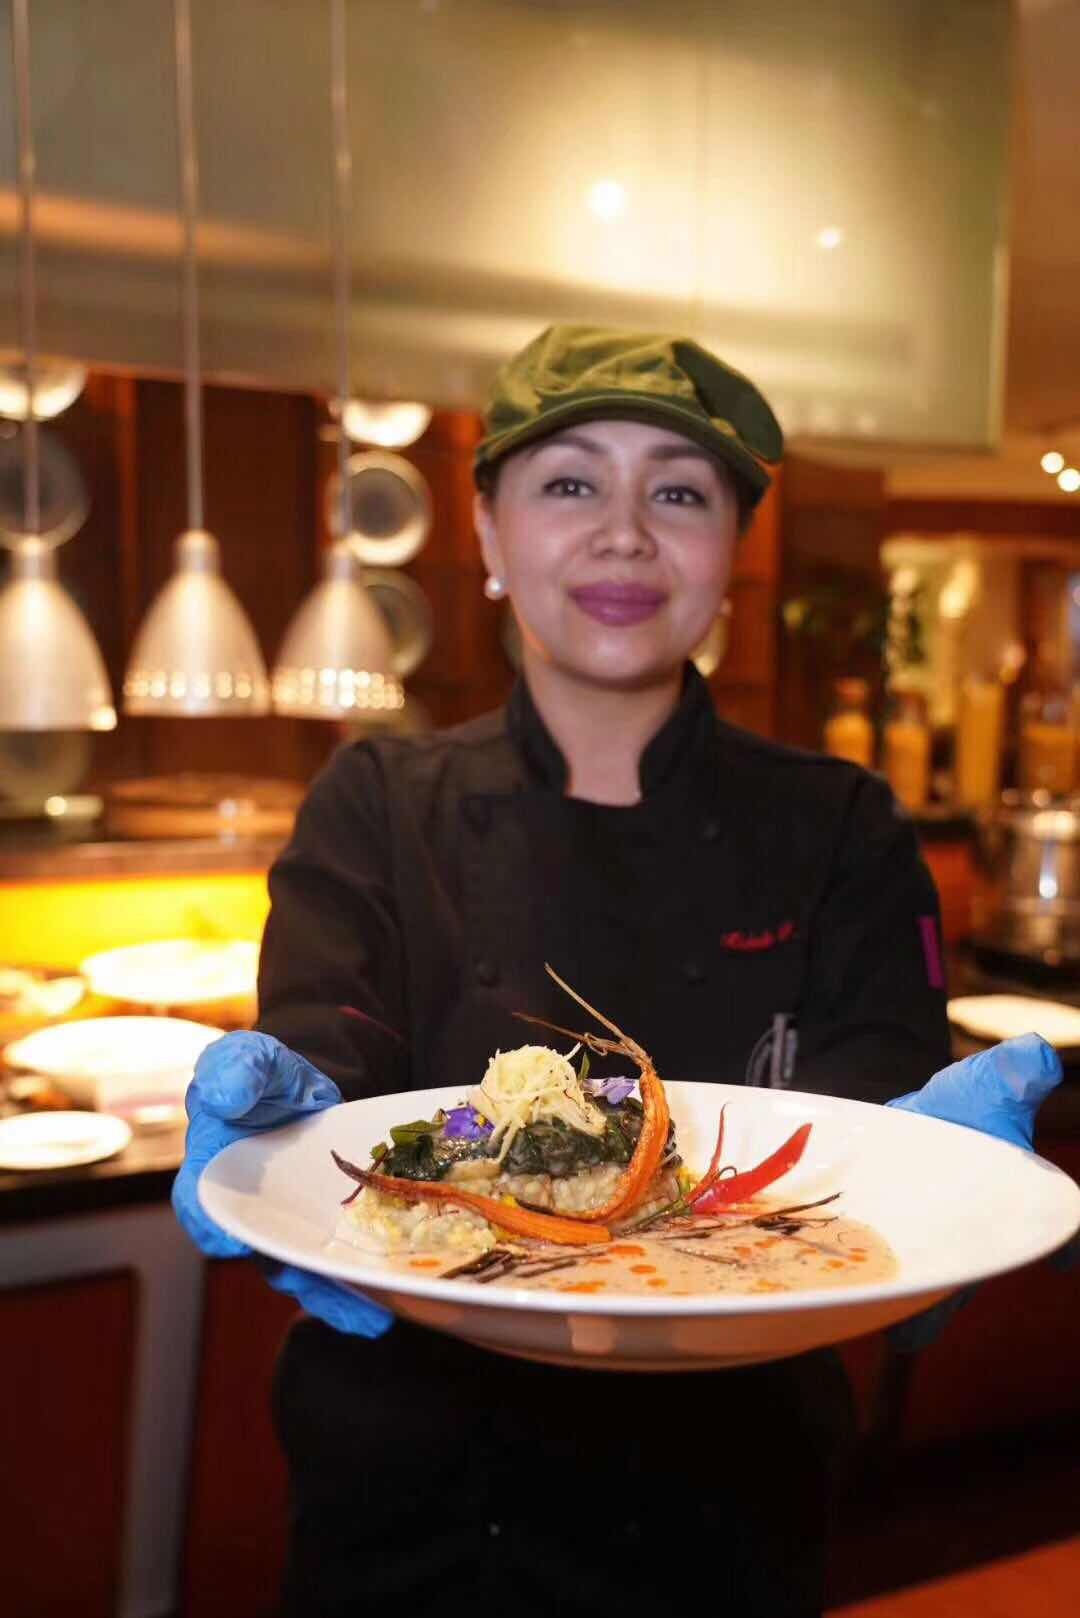 The chief chef of Philippines Food Festival 